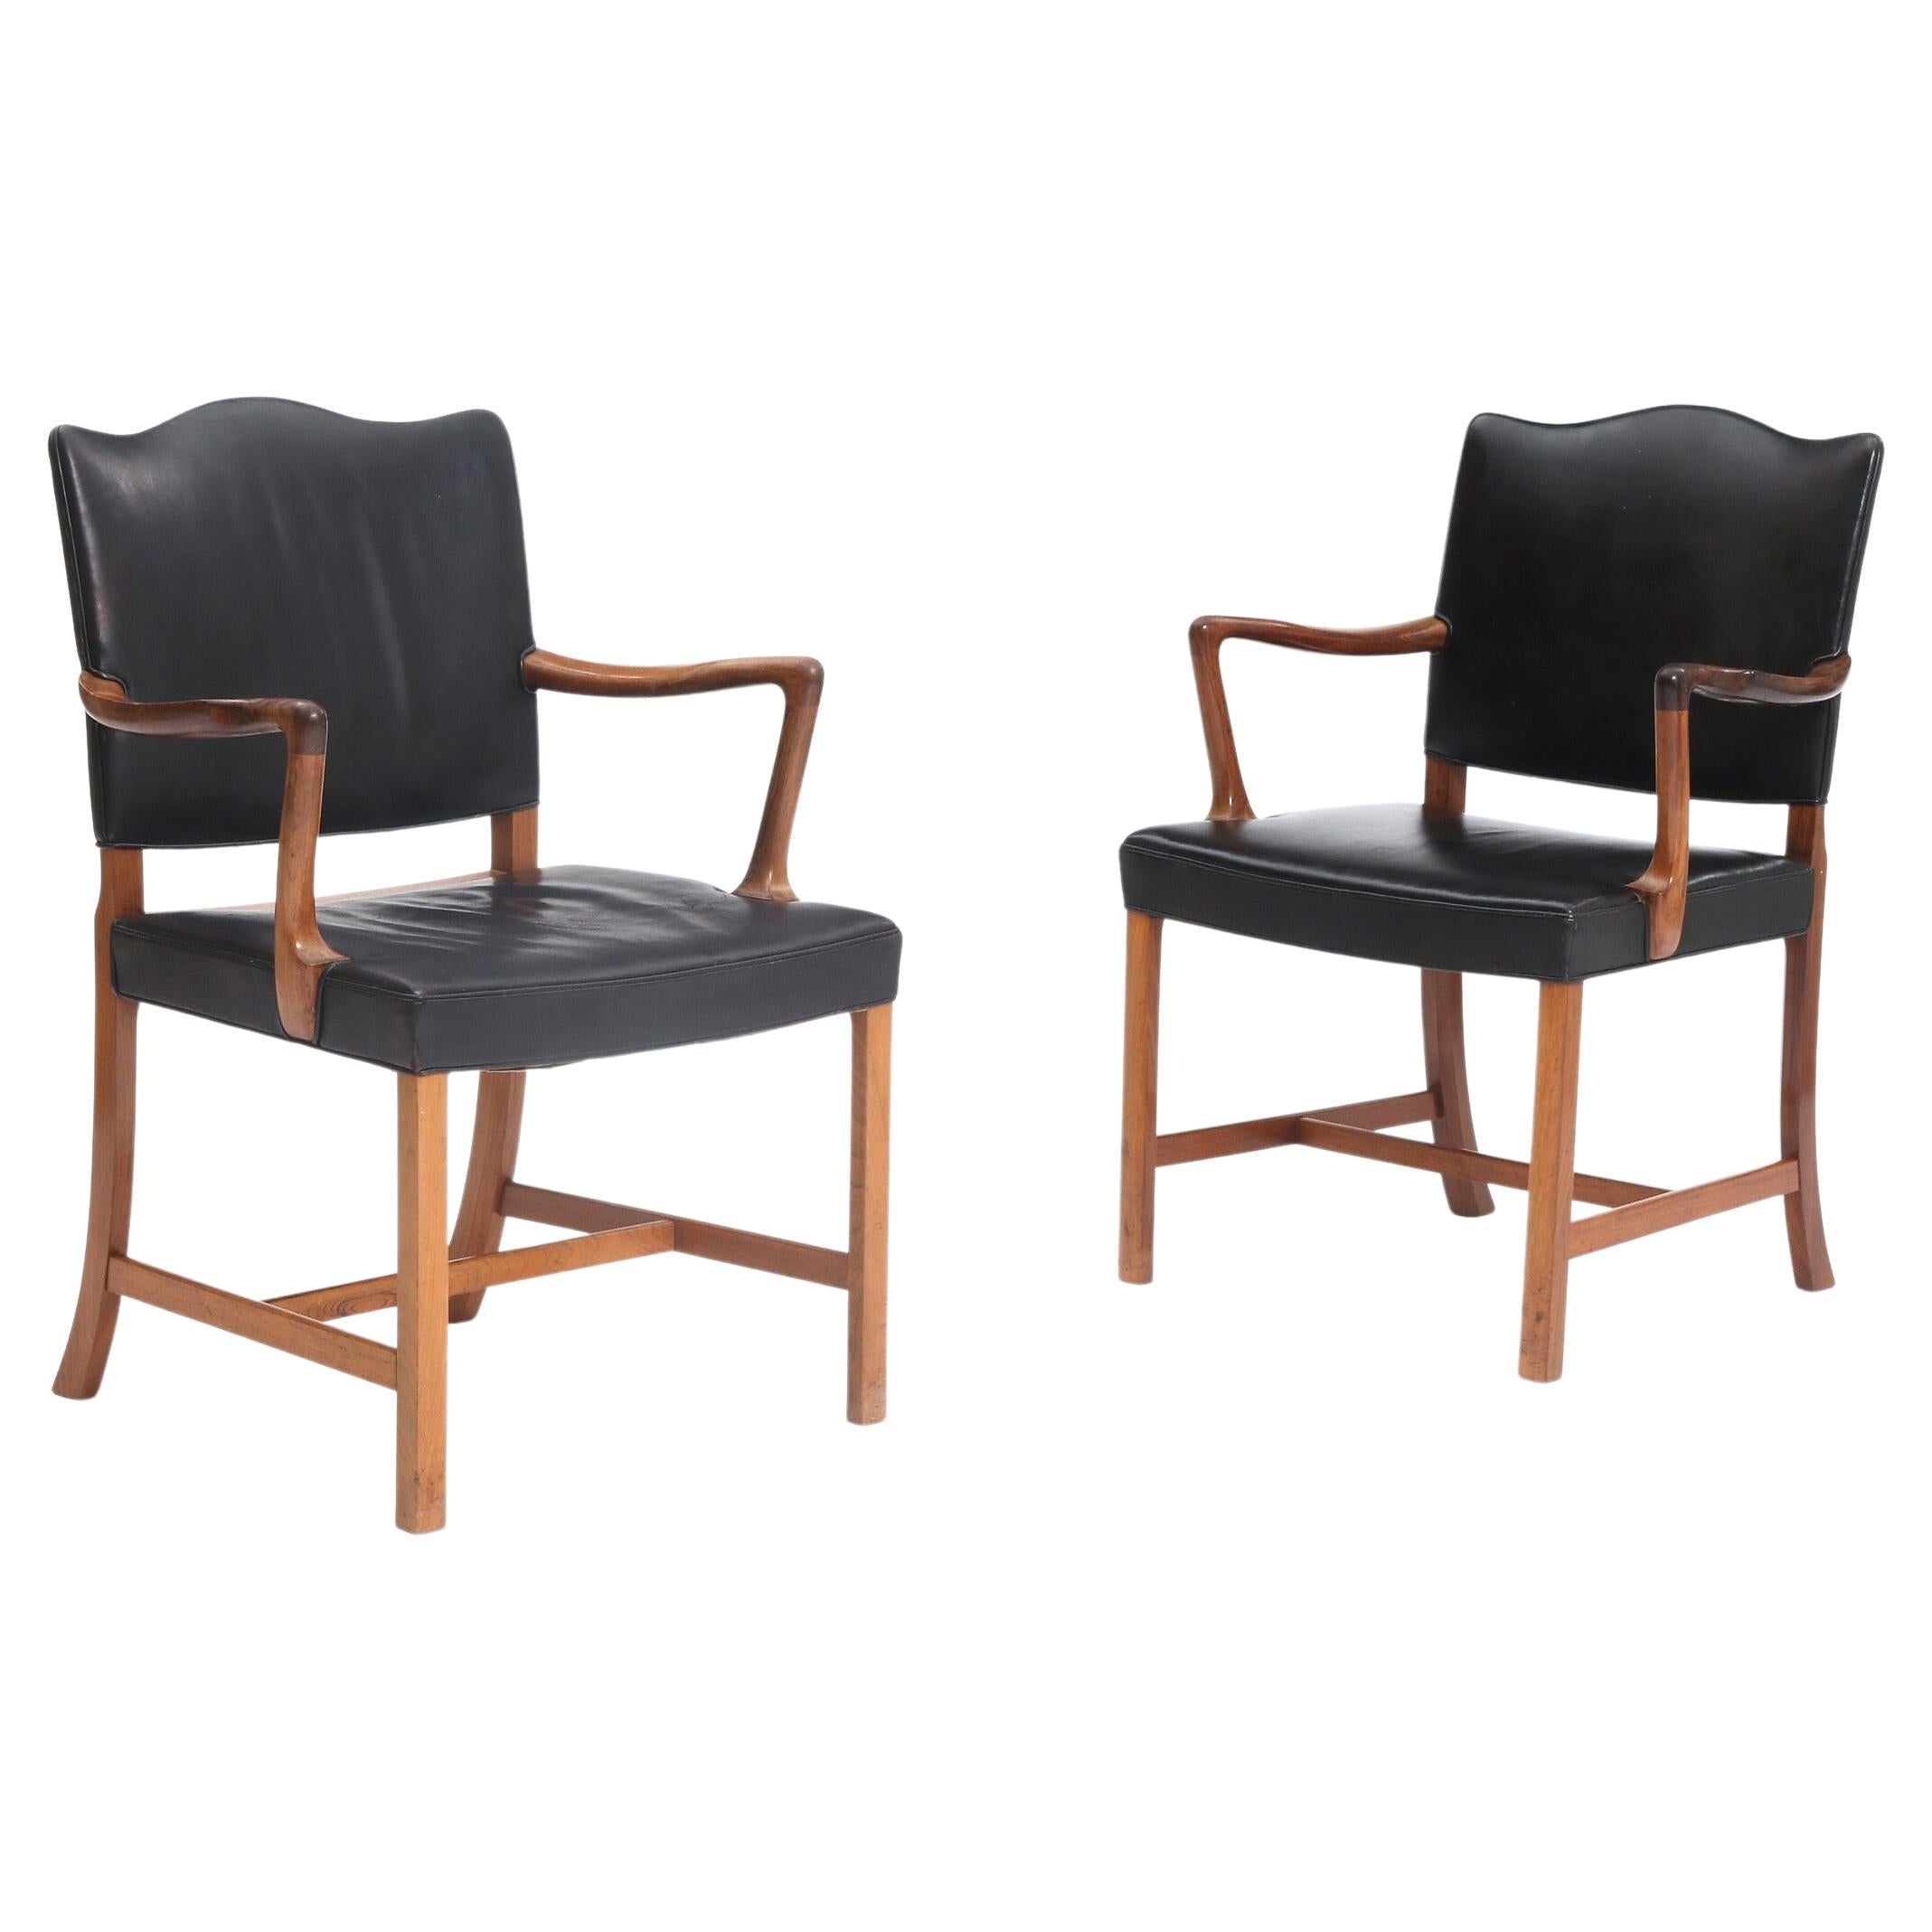 Pair of Rosewood Armchairs by Ole Wanscher Upholstered with Black Leather